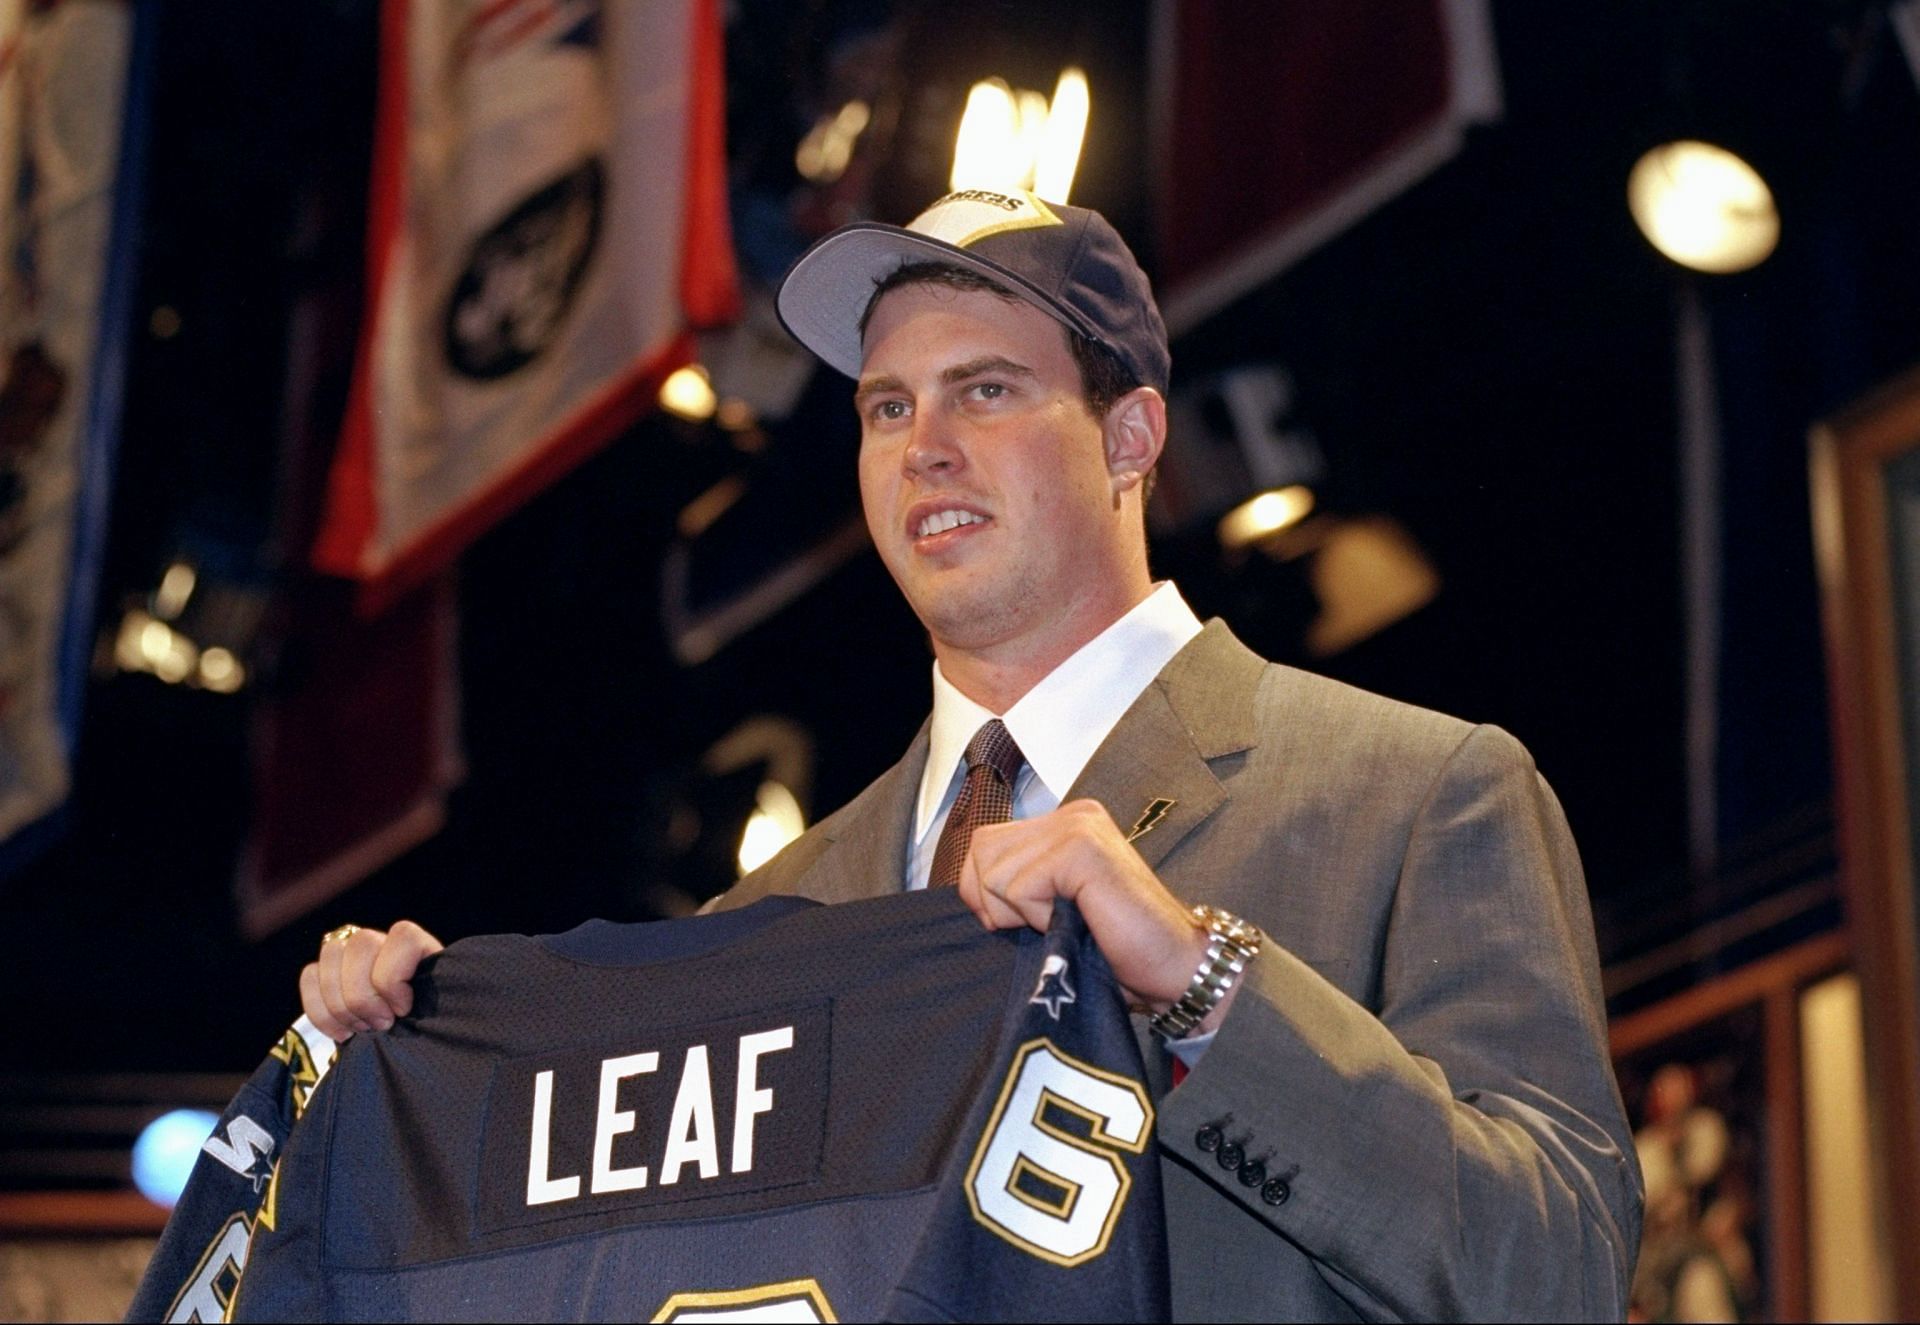 Second-overall pick Ryan Leaf shows off his jersey after being selected by the San Diego Chargers